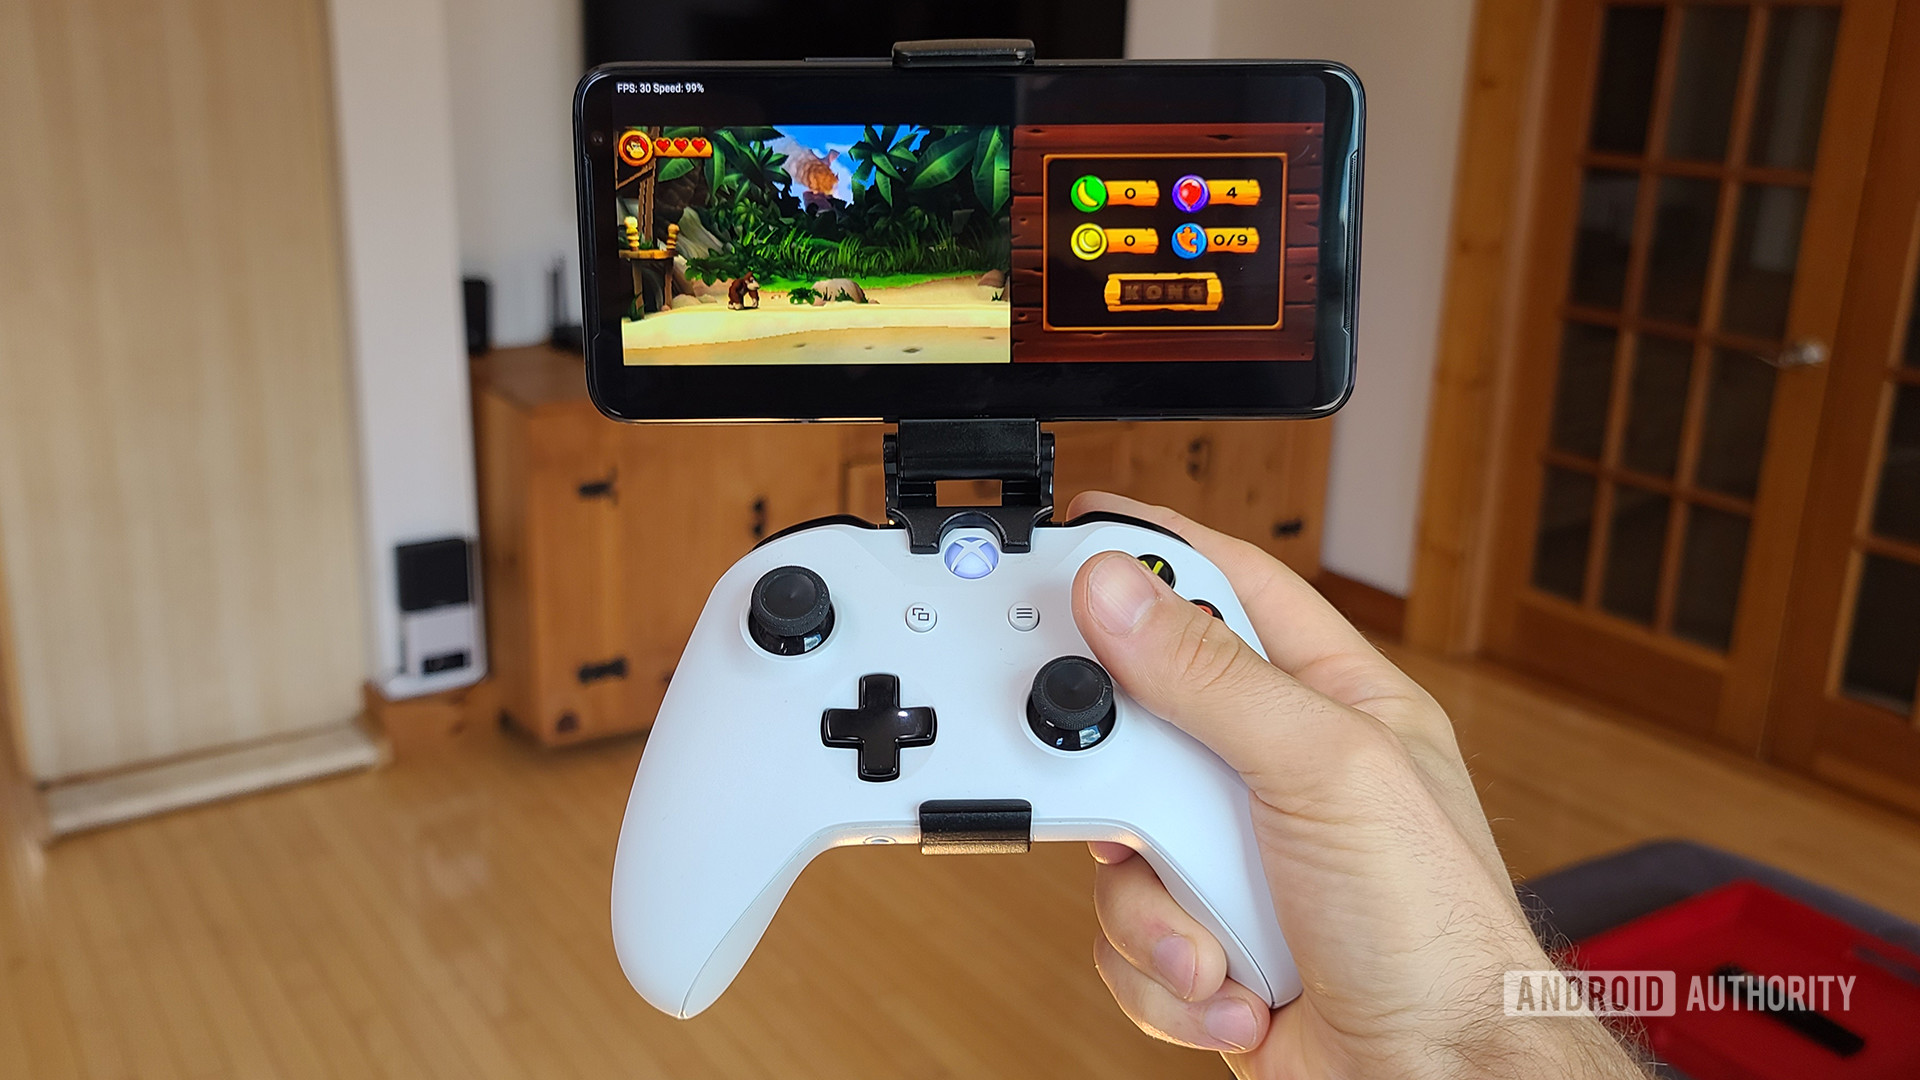 heroína Polinizador flojo How to use an Xbox controller on Android devices - Android Authority